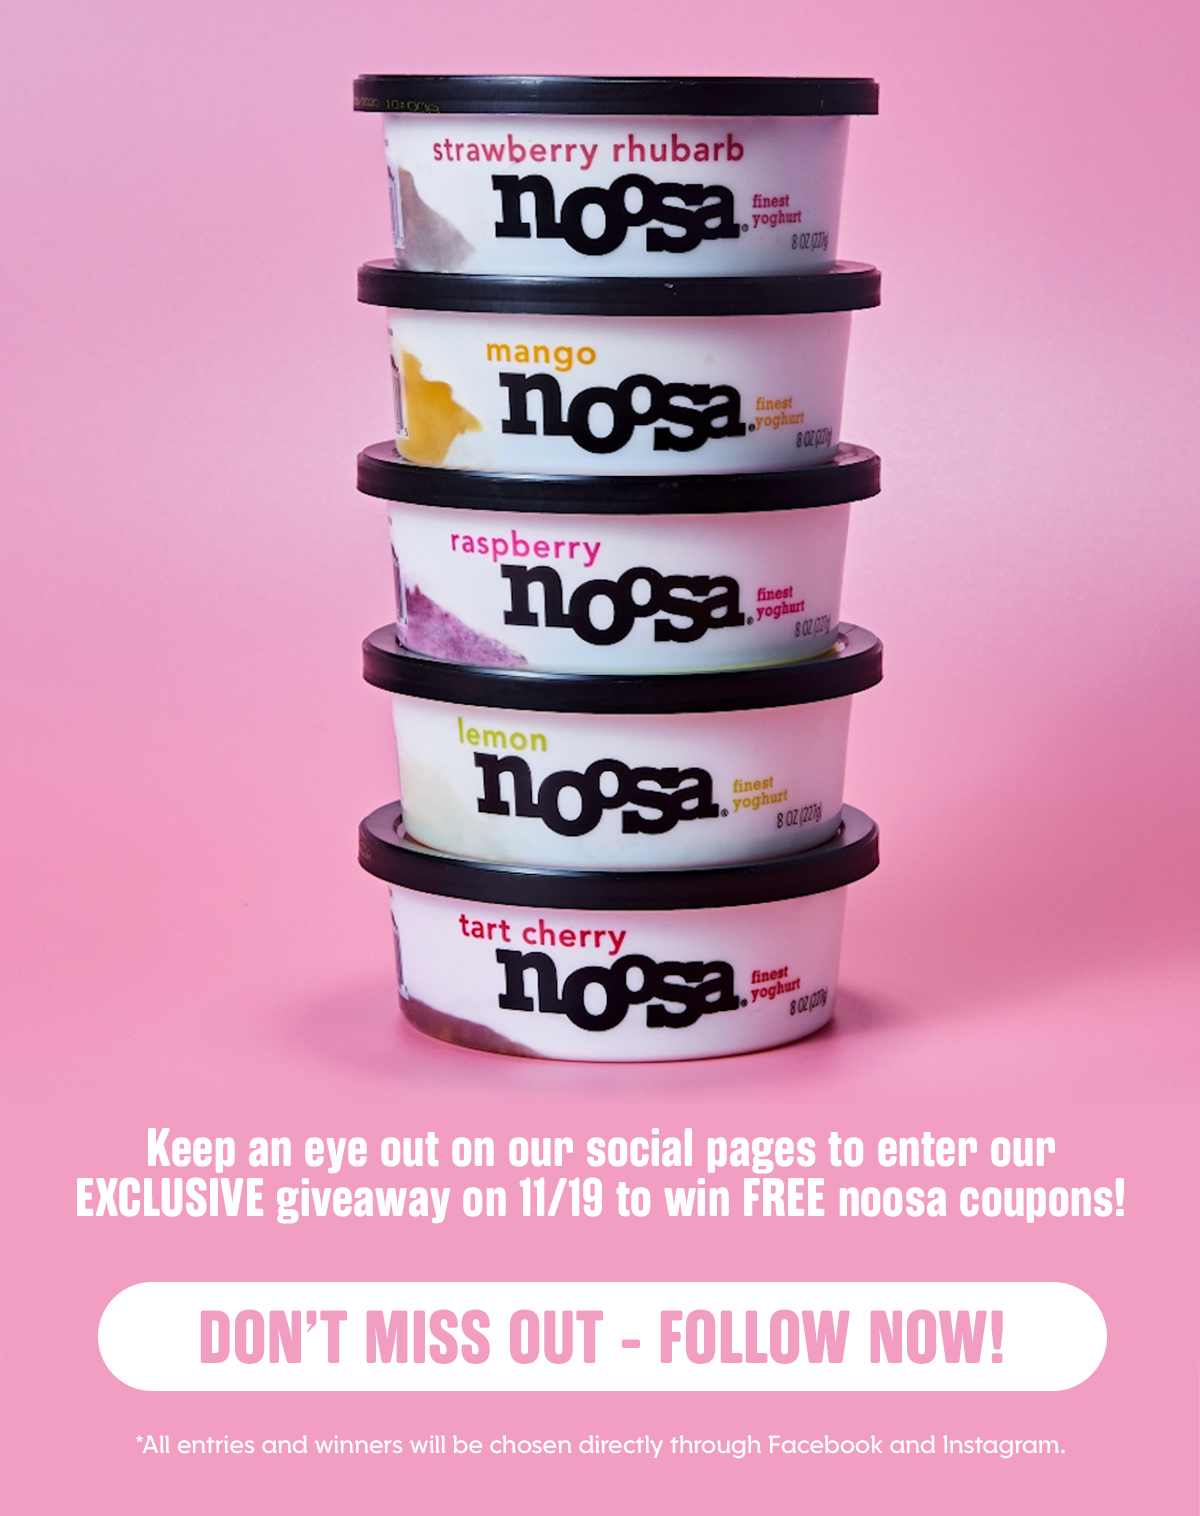 Keep an eye out on our social pages to enter our EXCLUSIVE giveaway on 11/19 to win FREE noosa coupons!